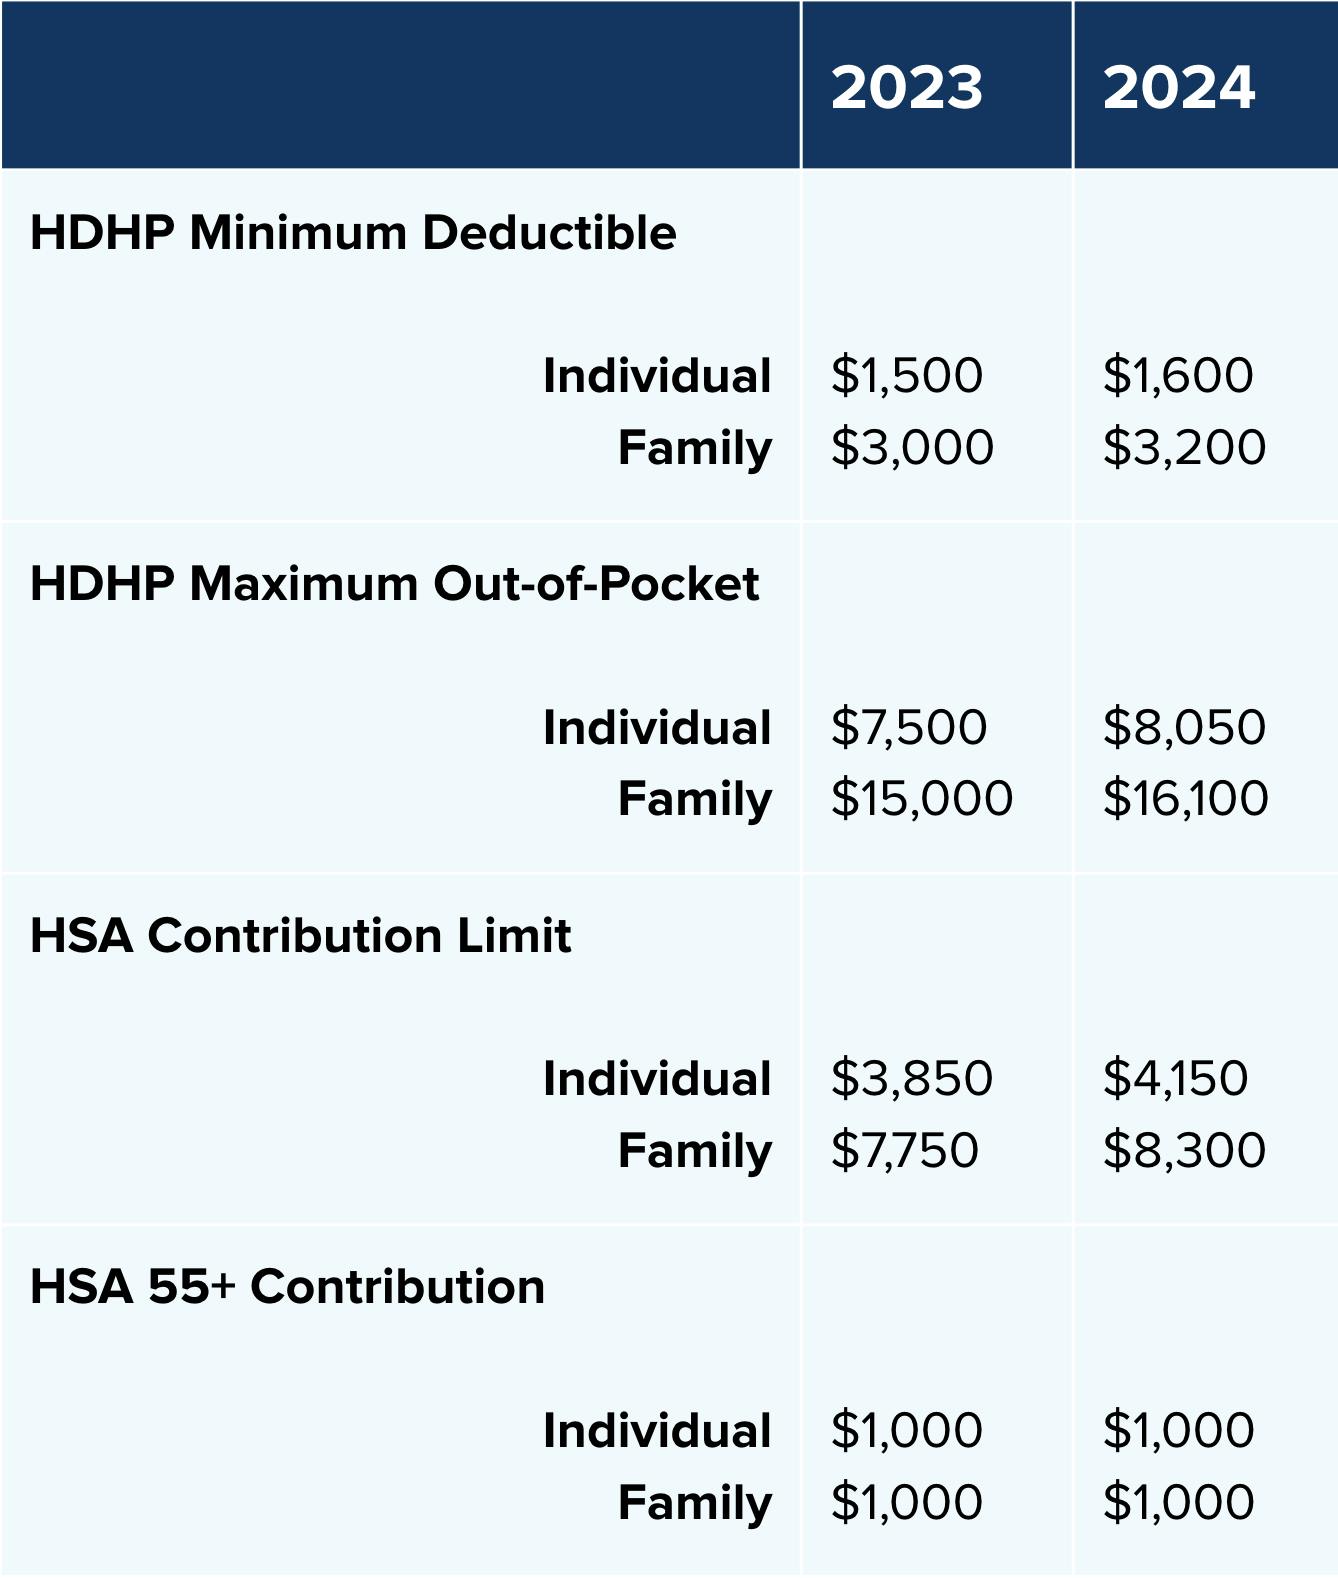 Significant HSA Contribution Limit Increase for 2024